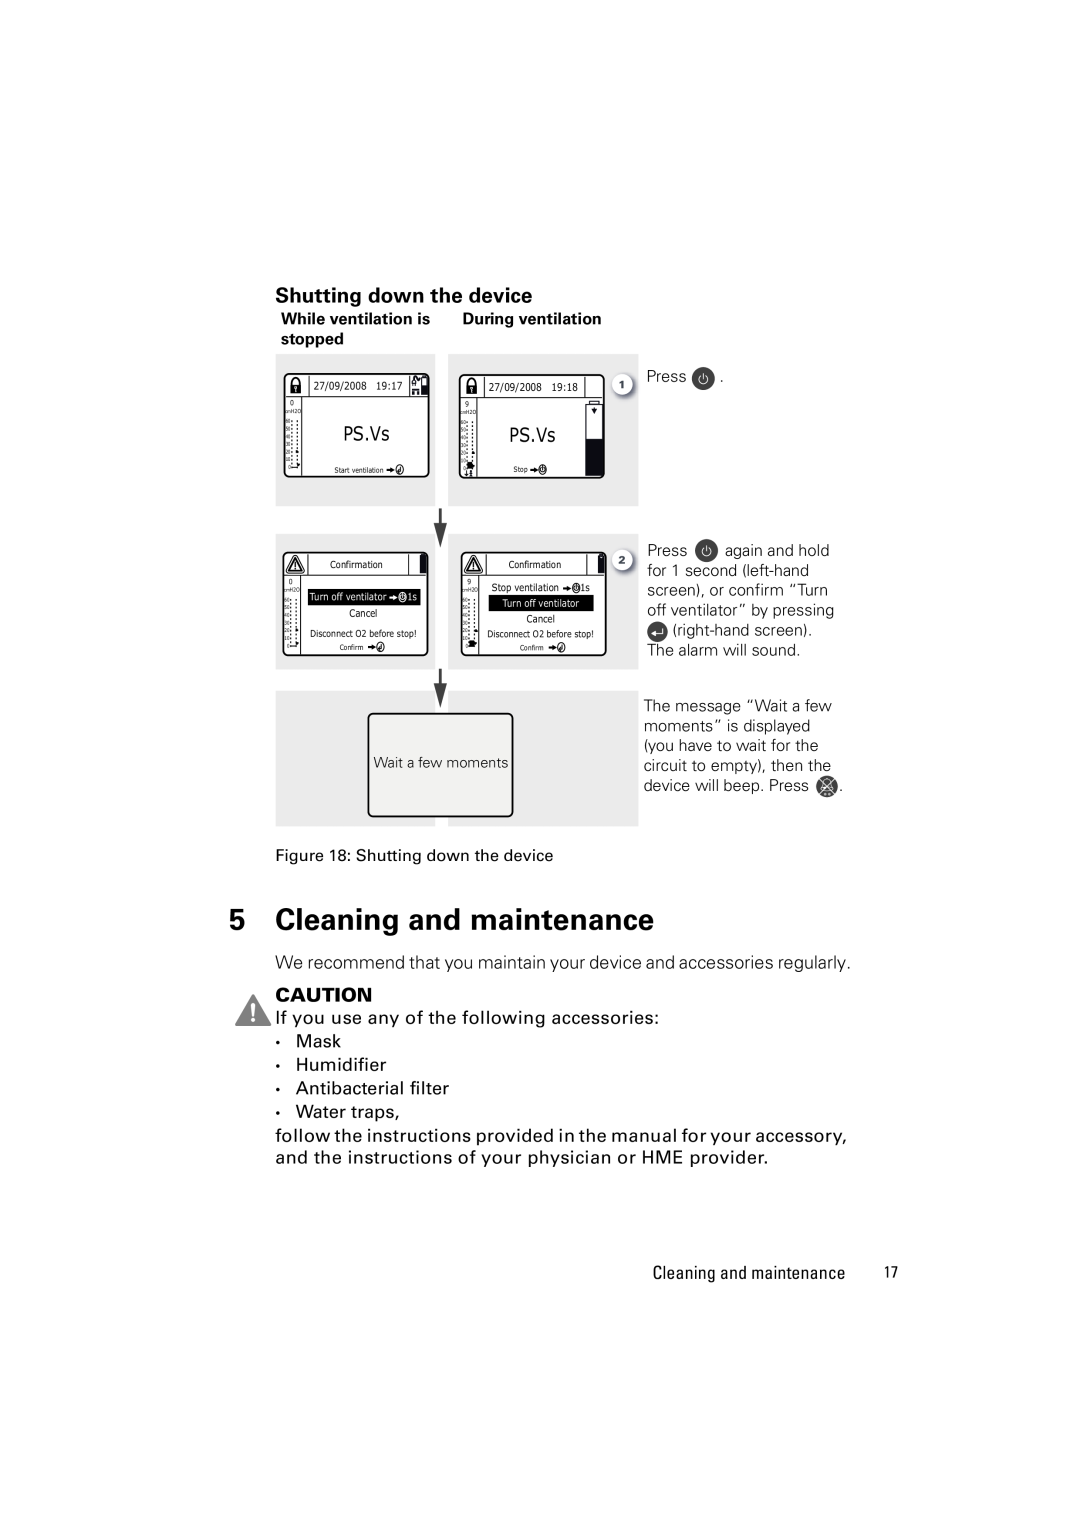 ResMed VS III user manual Cleaning and maintenance, Shutting down the device, PS.Vs 